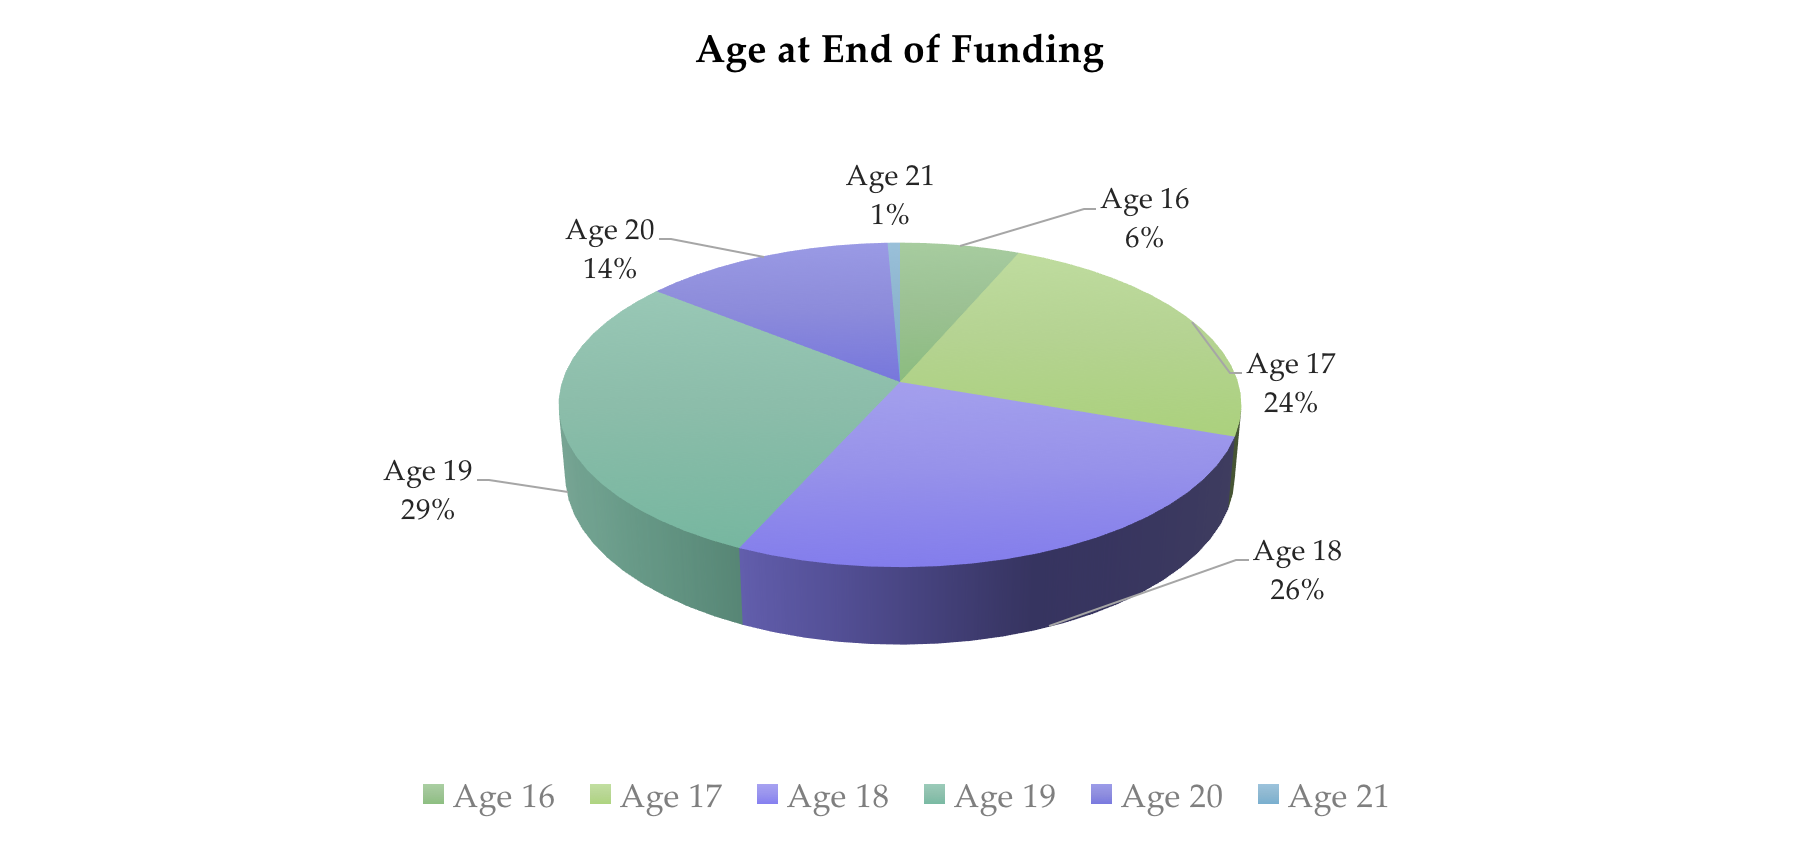 Pie chart shows the age of CaPROMISE Youth on 09/30/18, the end of funding. Age 16 - 6%, age 17 - 24%, age 18 - 26%, age 19 - 29%, age 20 - 14%, age 21 - 1%